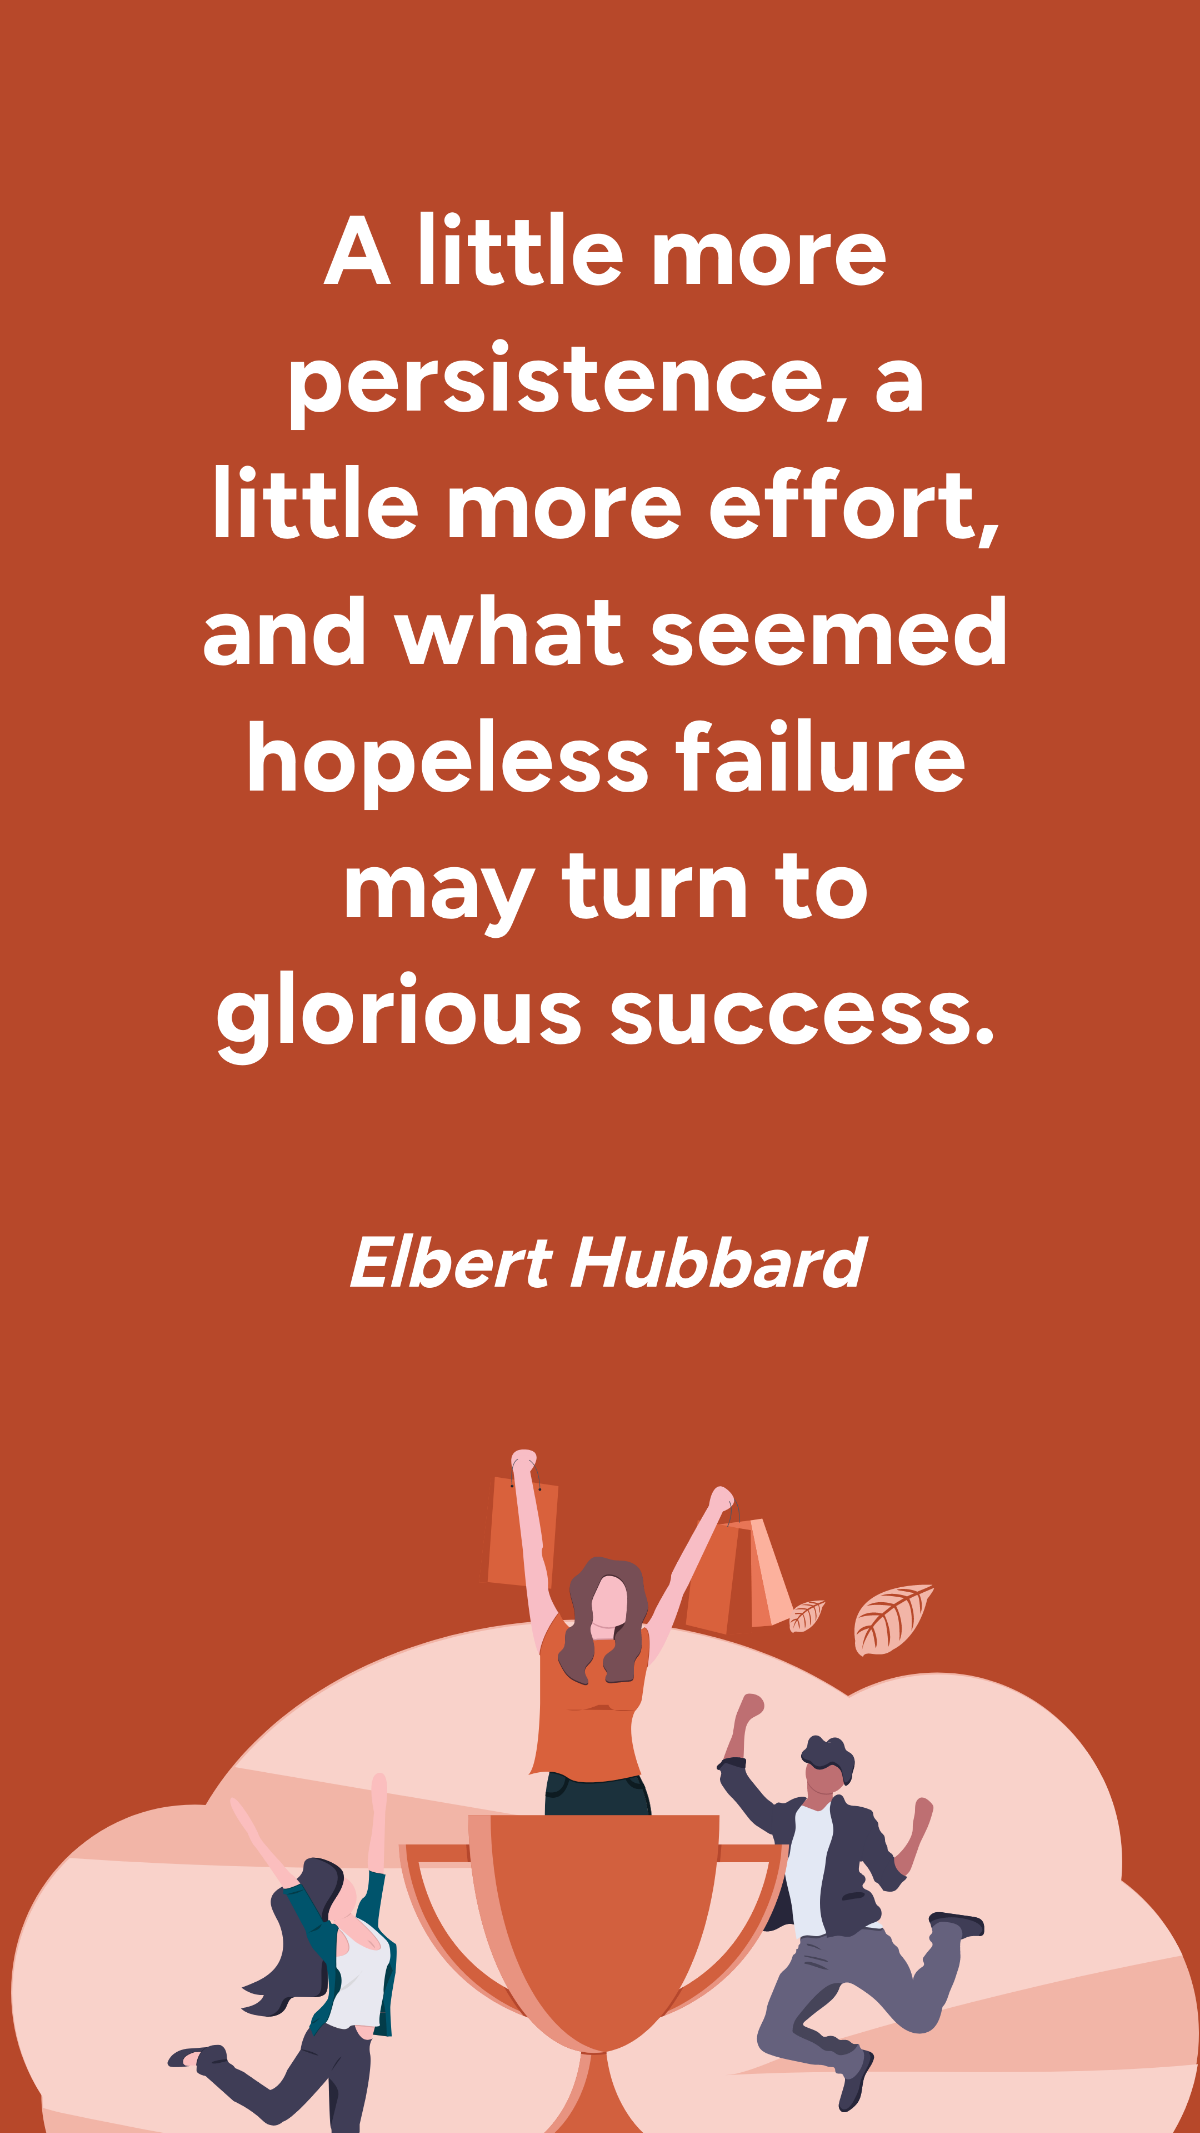 Elbert Hubbard - A little more persistence, a little more effort, and what seemed hopeless failure may turn to glorious success. Template